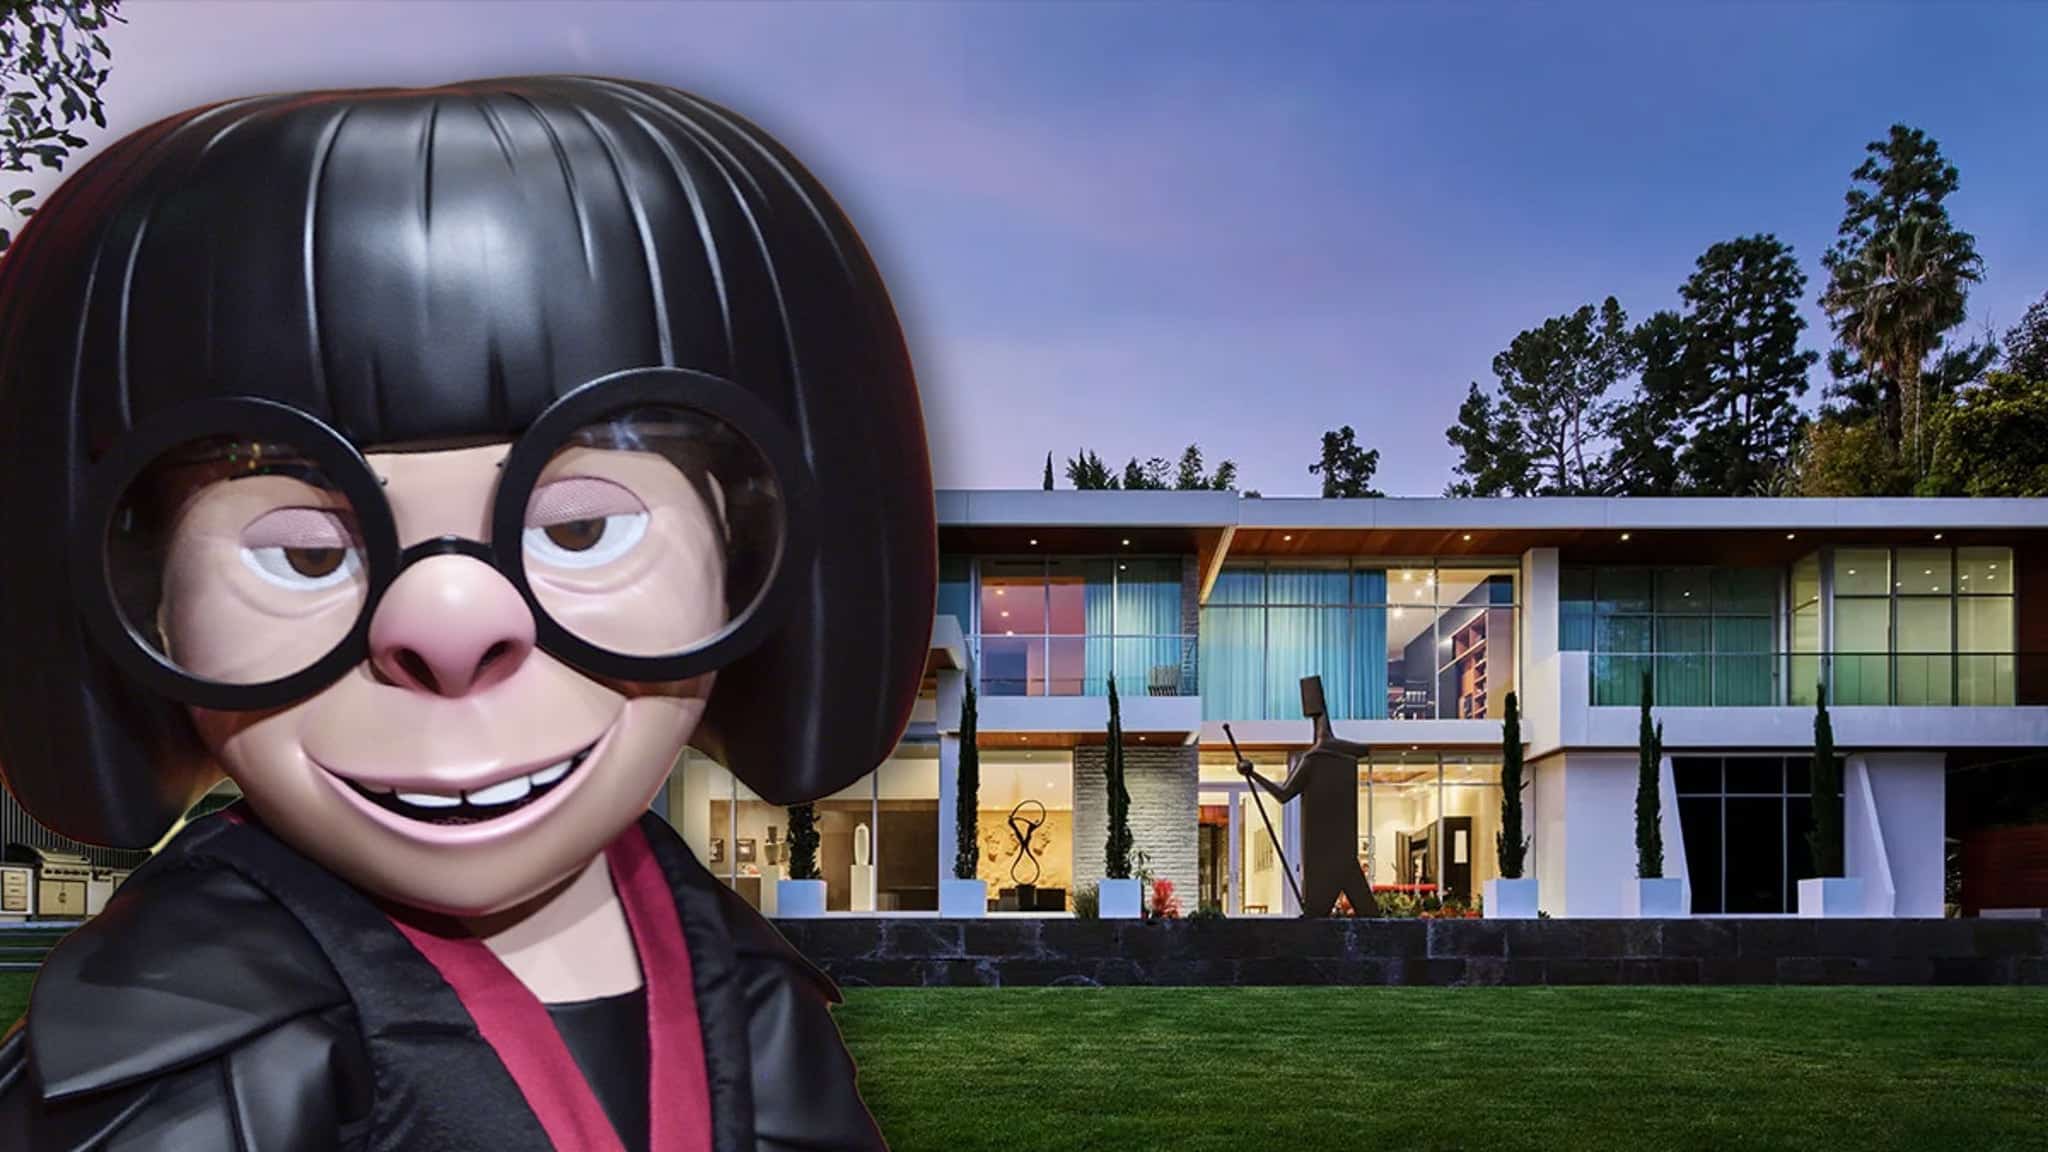 Airbnb Adds Edna's House From 'The Incredibles' to Icons Category